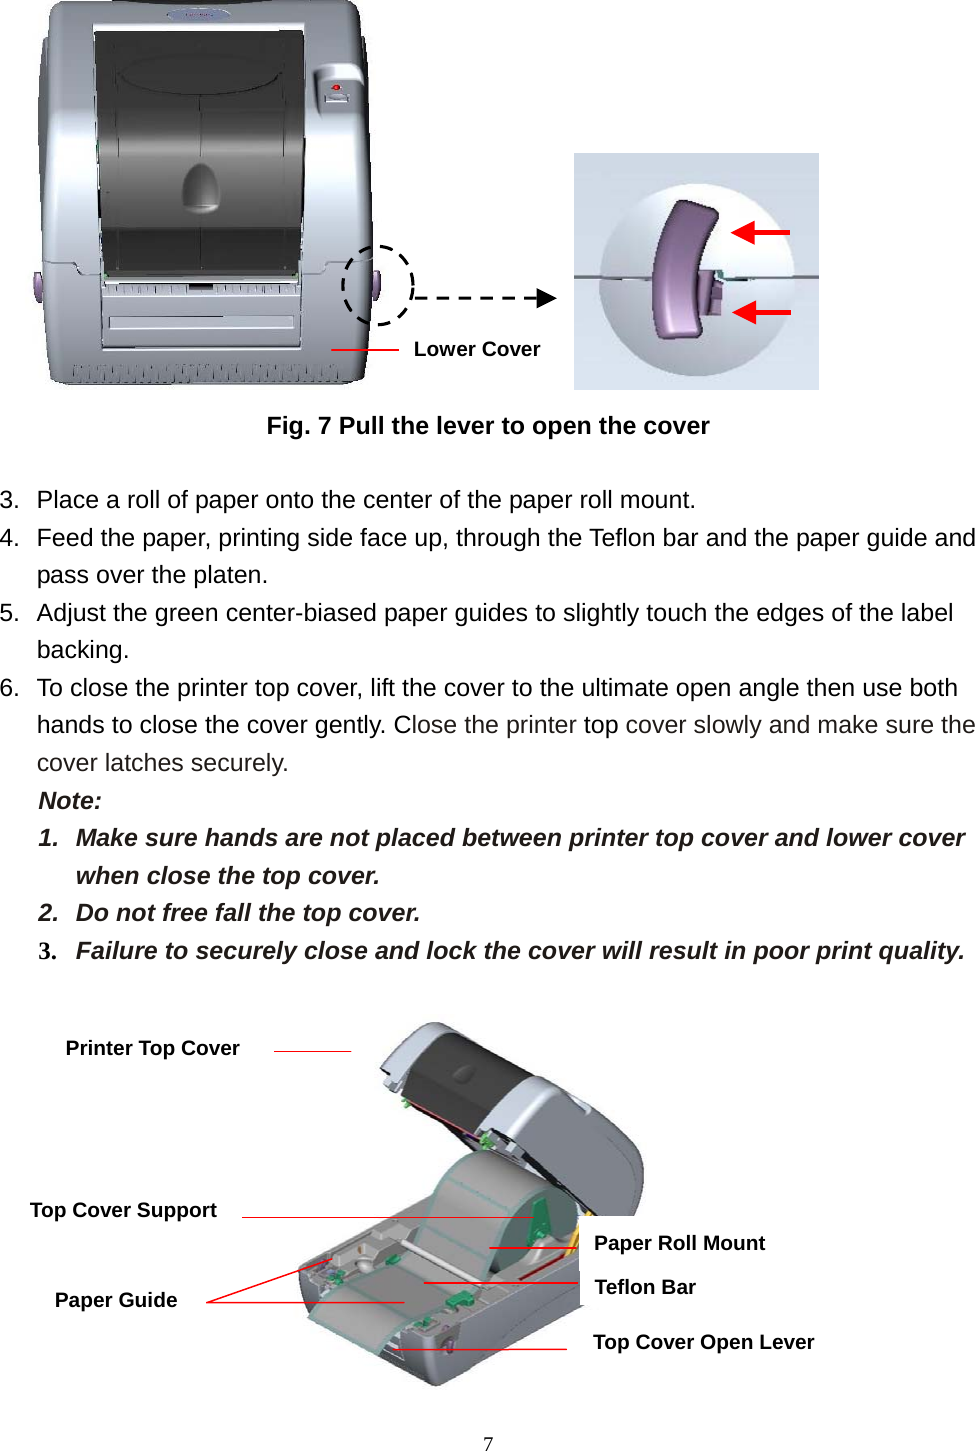  7               Fig. 7 Pull the lever to open the cover  3.  Place a roll of paper onto the center of the paper roll mount. 4.  Feed the paper, printing side face up, through the Teflon bar and the paper guide and pass over the platen. 5.  Adjust the green center-biased paper guides to slightly touch the edges of the label backing. 6.  To close the printer top cover, lift the cover to the ultimate open angle then use both hands to close the cover gently. Close the printer top cover slowly and make sure the cover latches securely. Note:  1.  Make sure hands are not placed between printer top cover and lower cover when close the top cover. 2.  Do not free fall the top cover.   3.  Failure to securely close and lock the cover will result in poor print quality.   Lower CoverPrinter Top Cover Top Cover Support Paper Guide  Teflon BarTop Cover Open Lever Paper Roll Mount 